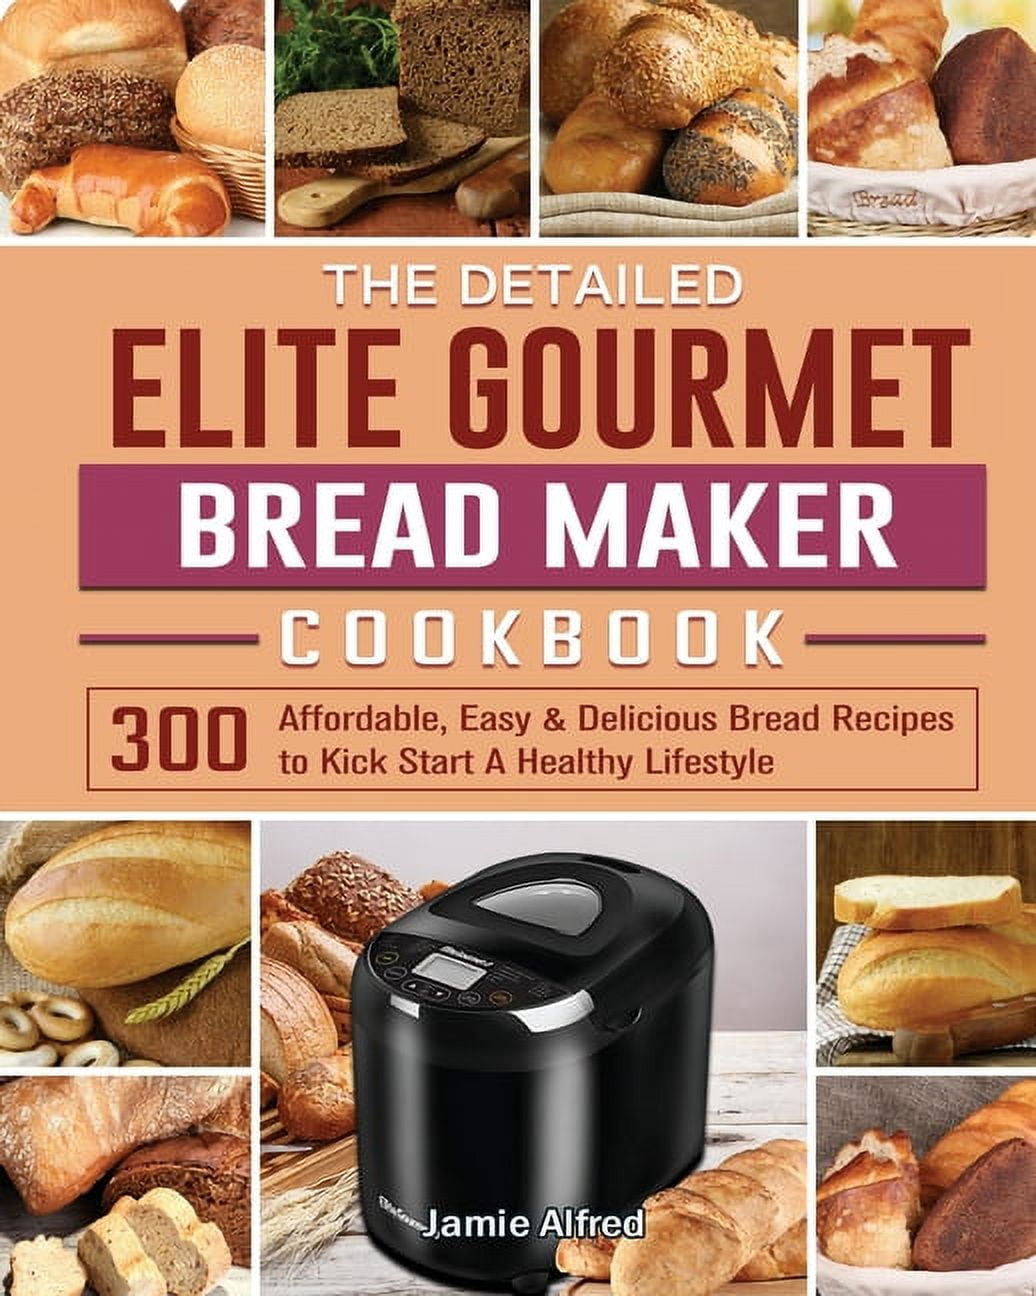 The Detailed Elite Gourmet Bread Maker Cookbook: 300 Affordable, Easy & Delicious Bread Recipes to Kick Start A Healthy Lifestyle [Book]